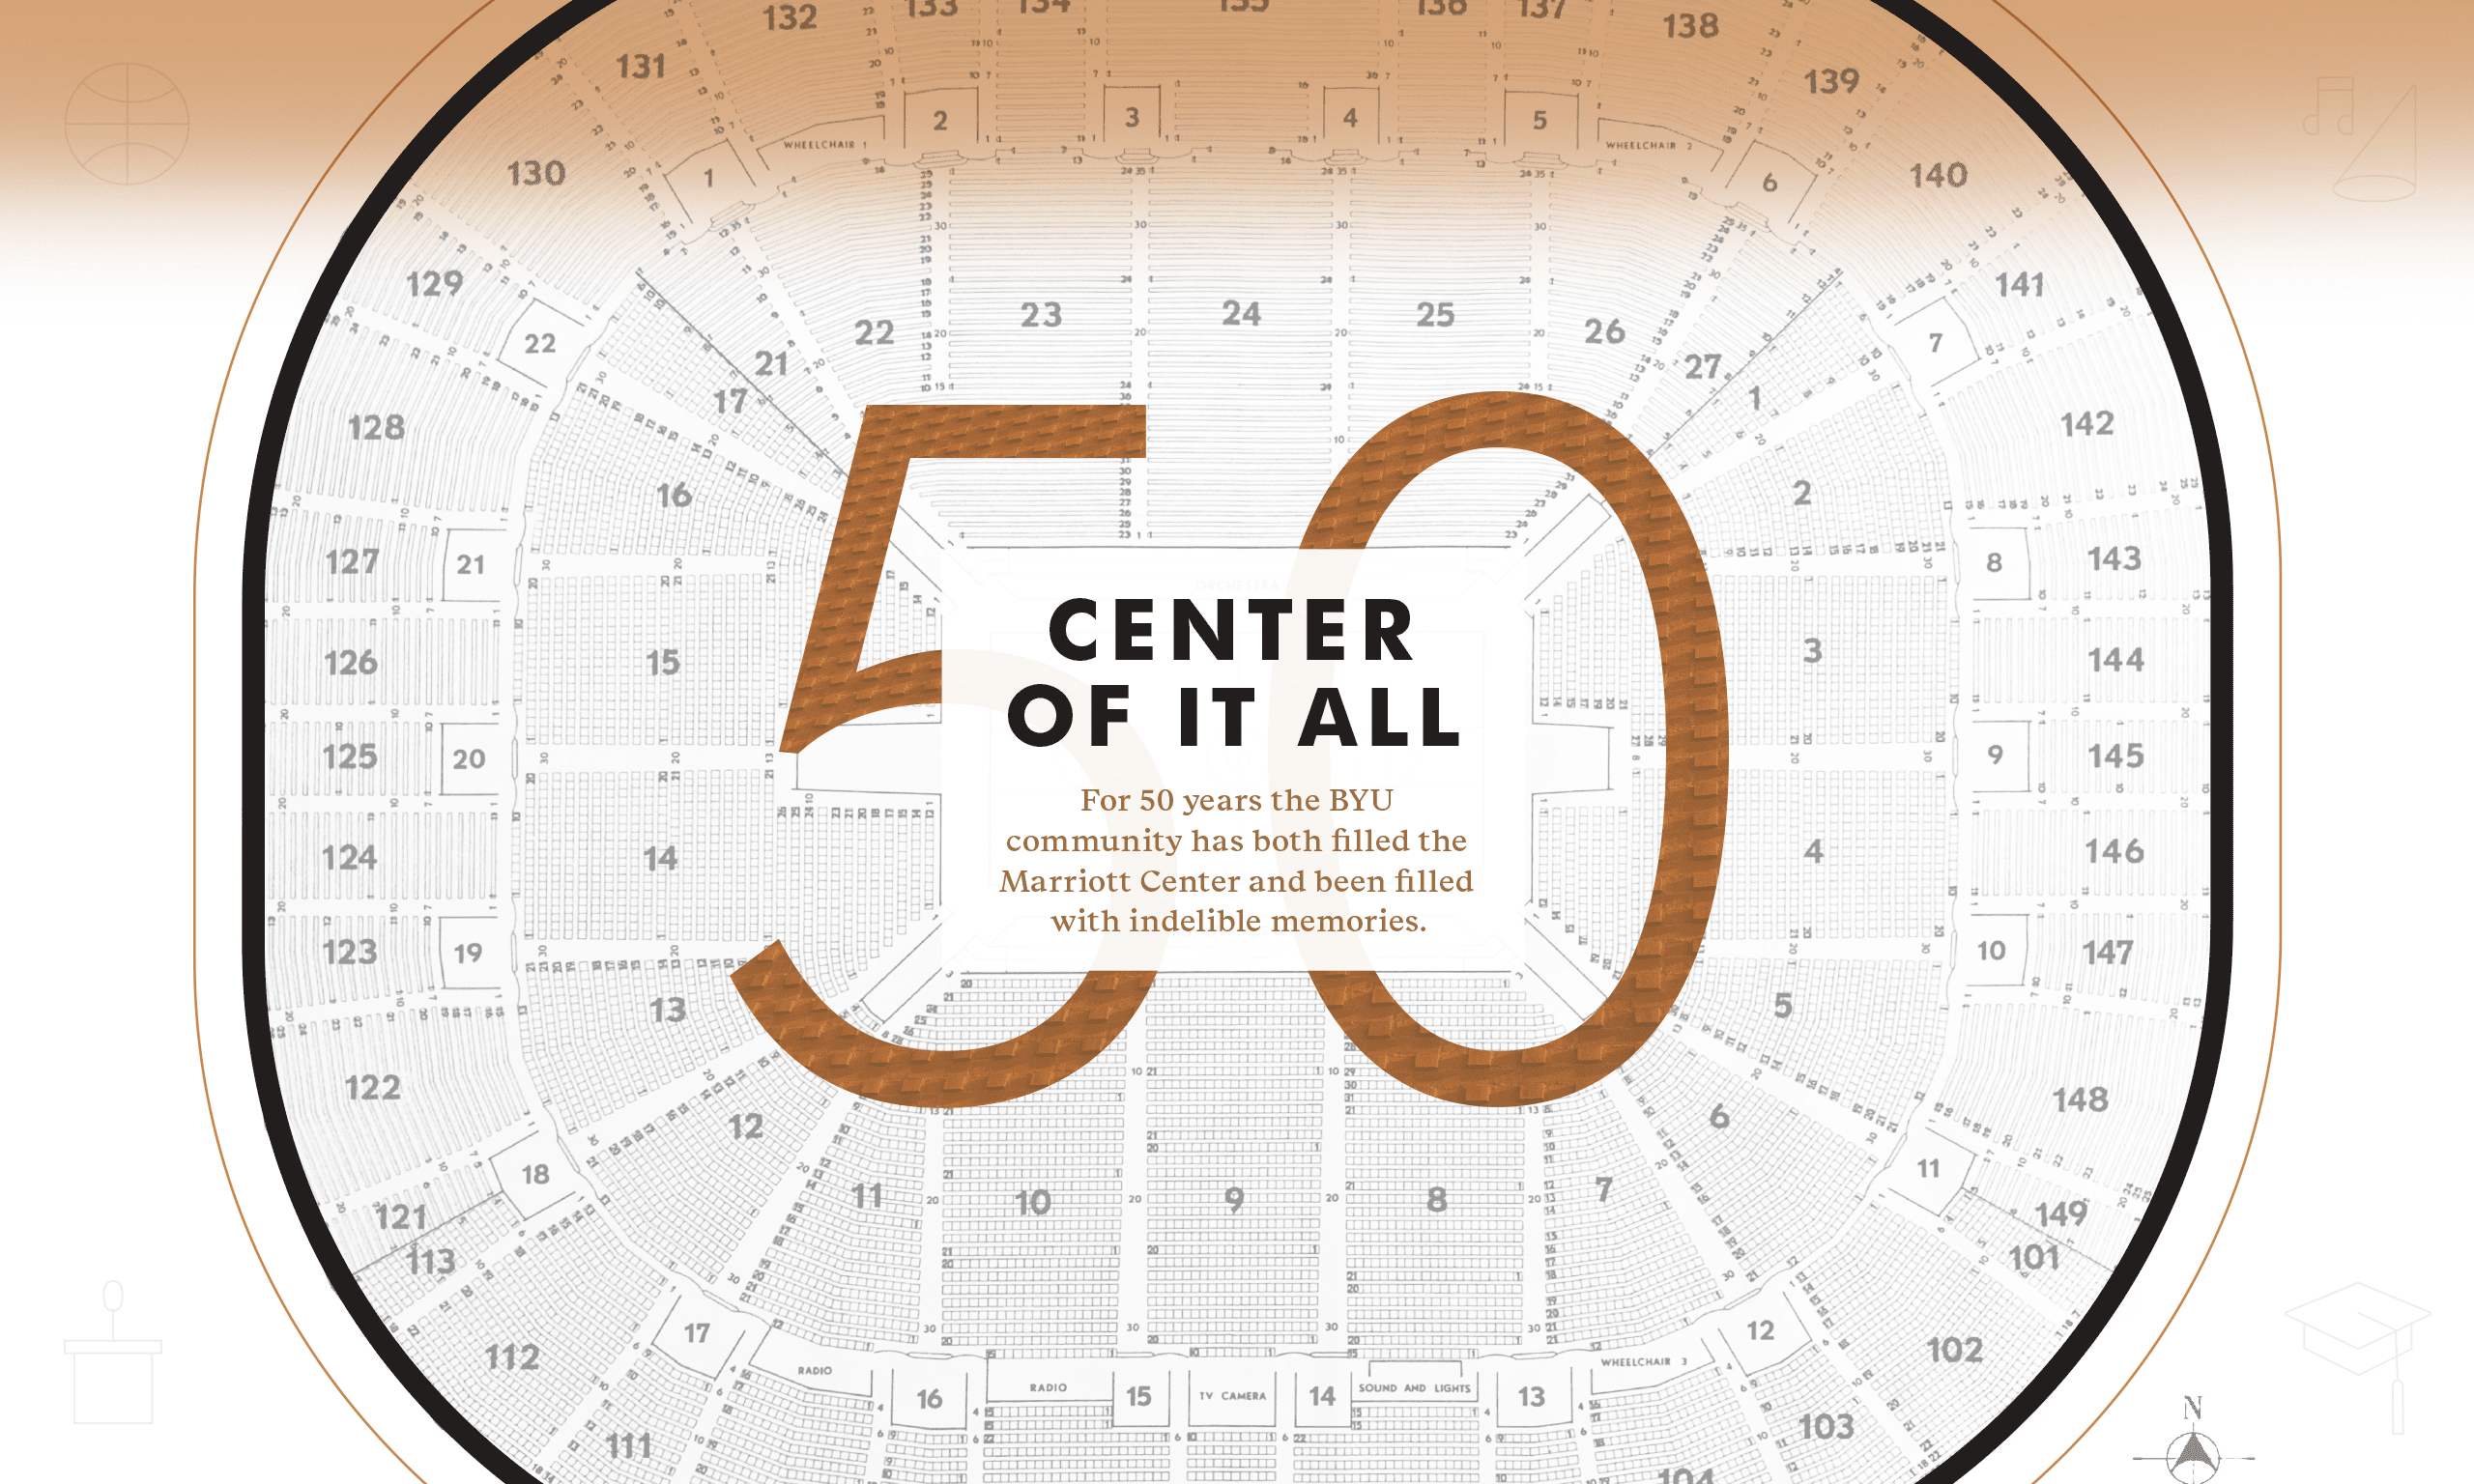 A seating chart showing the Marriott Center area with the text Center of it All: For 50 years the BYU community has both filled the Marriott Center and been filled with indelible memories.